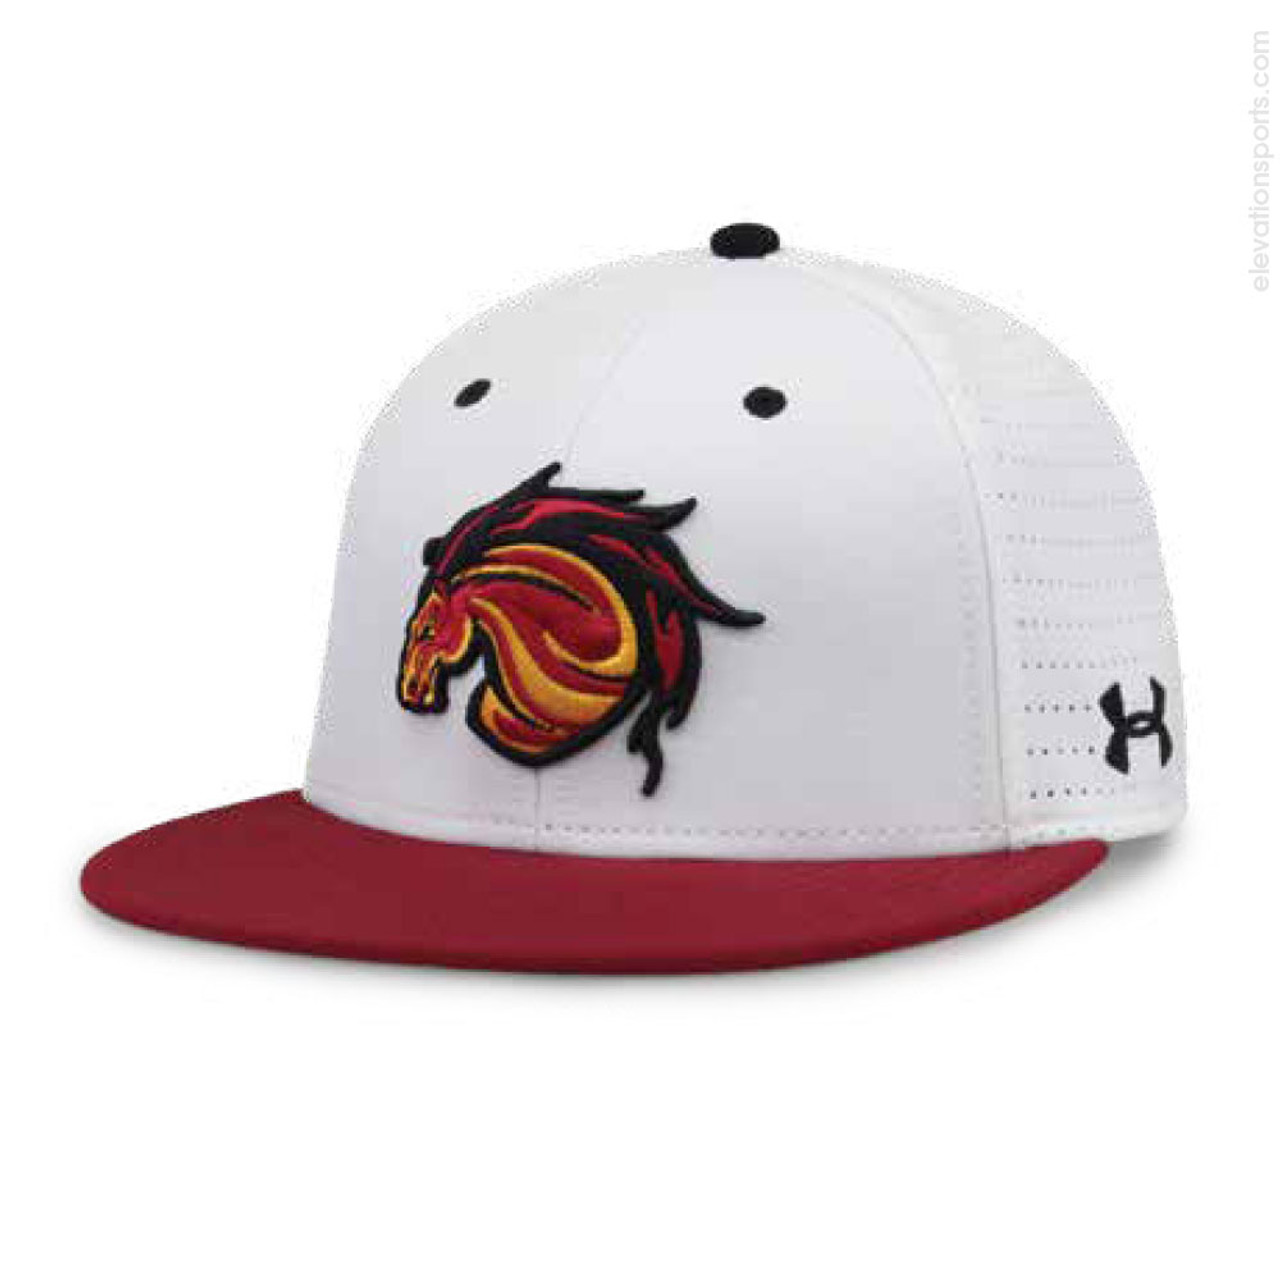 Under Armour Perforated Custom Resistor Hats